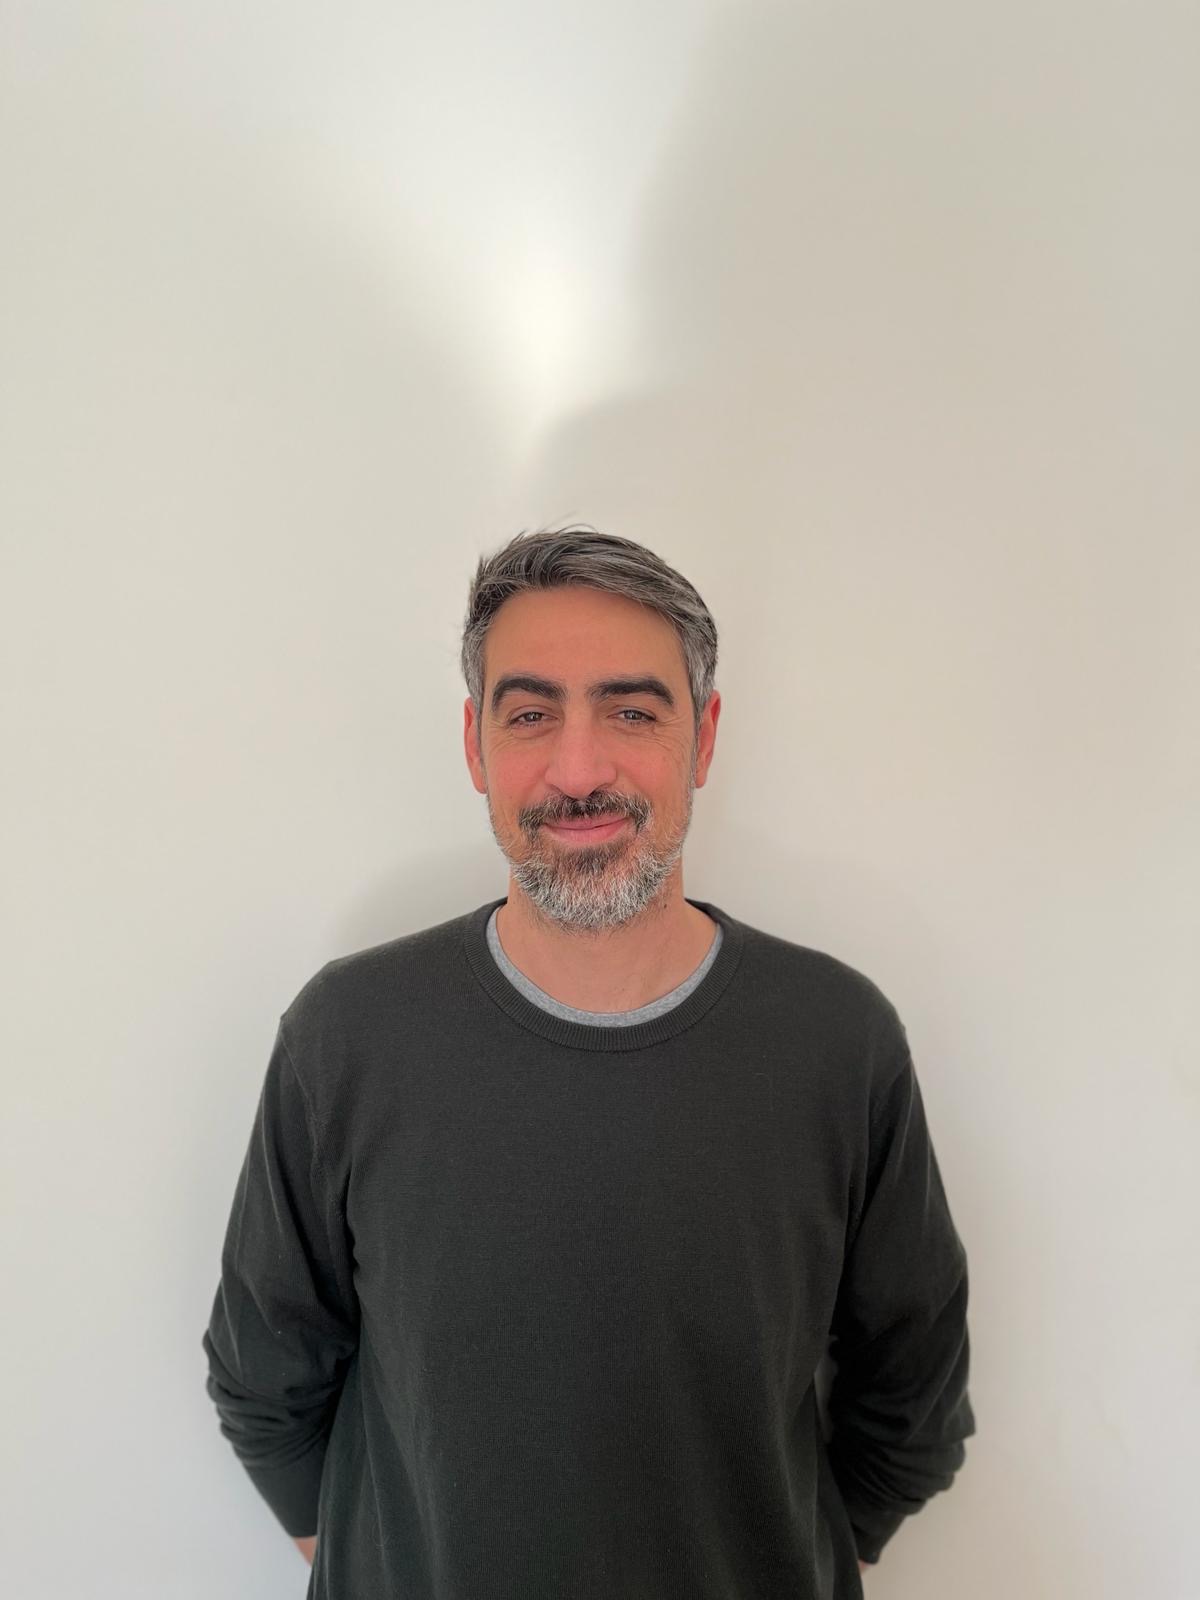 Stefano Piccini joins the Armando Testa Turin Group from Madrid